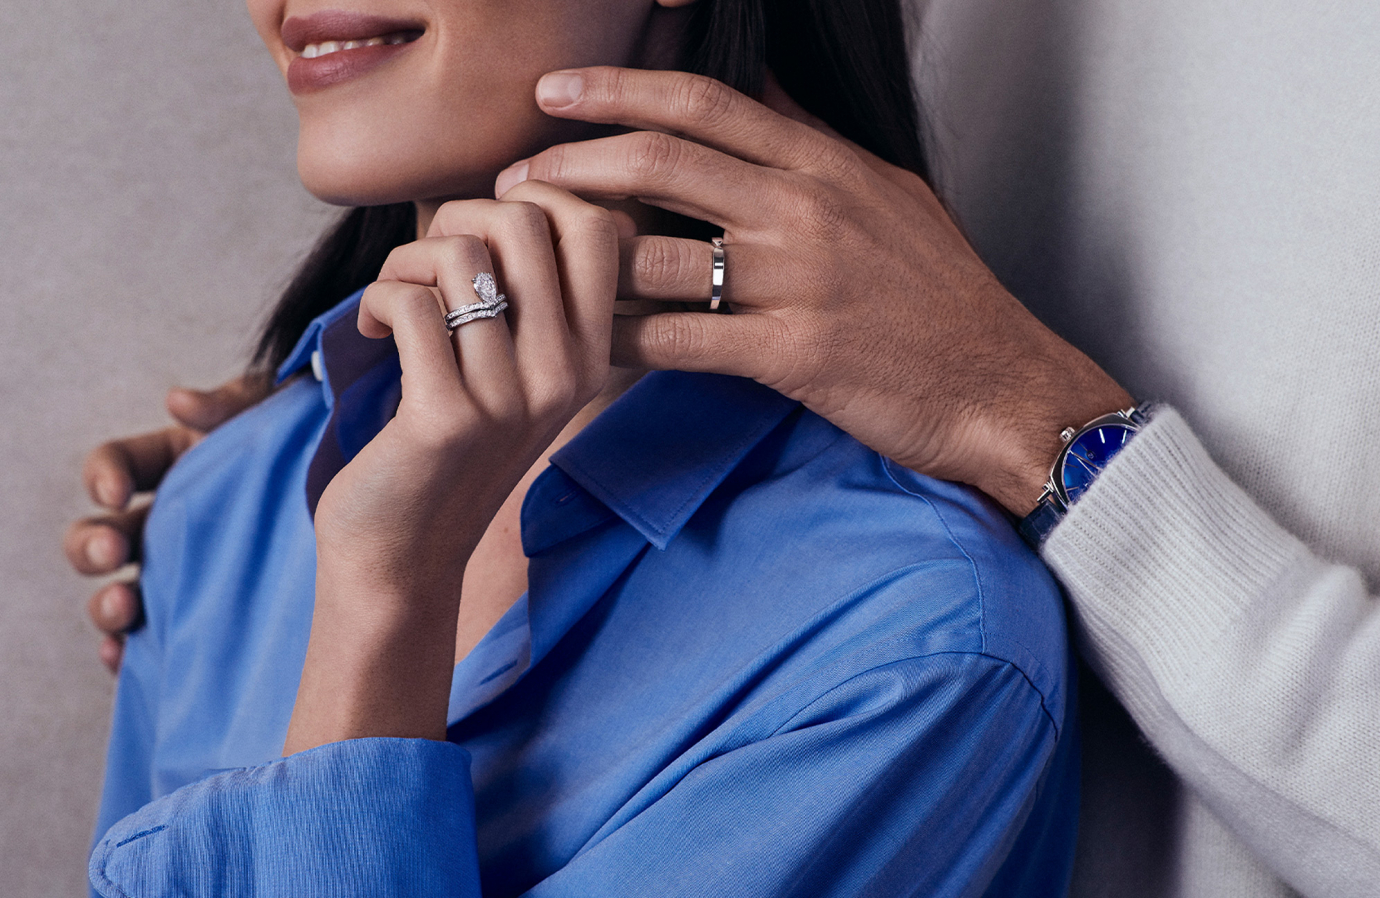 Chaumet - LVMH Watches & Jewelry